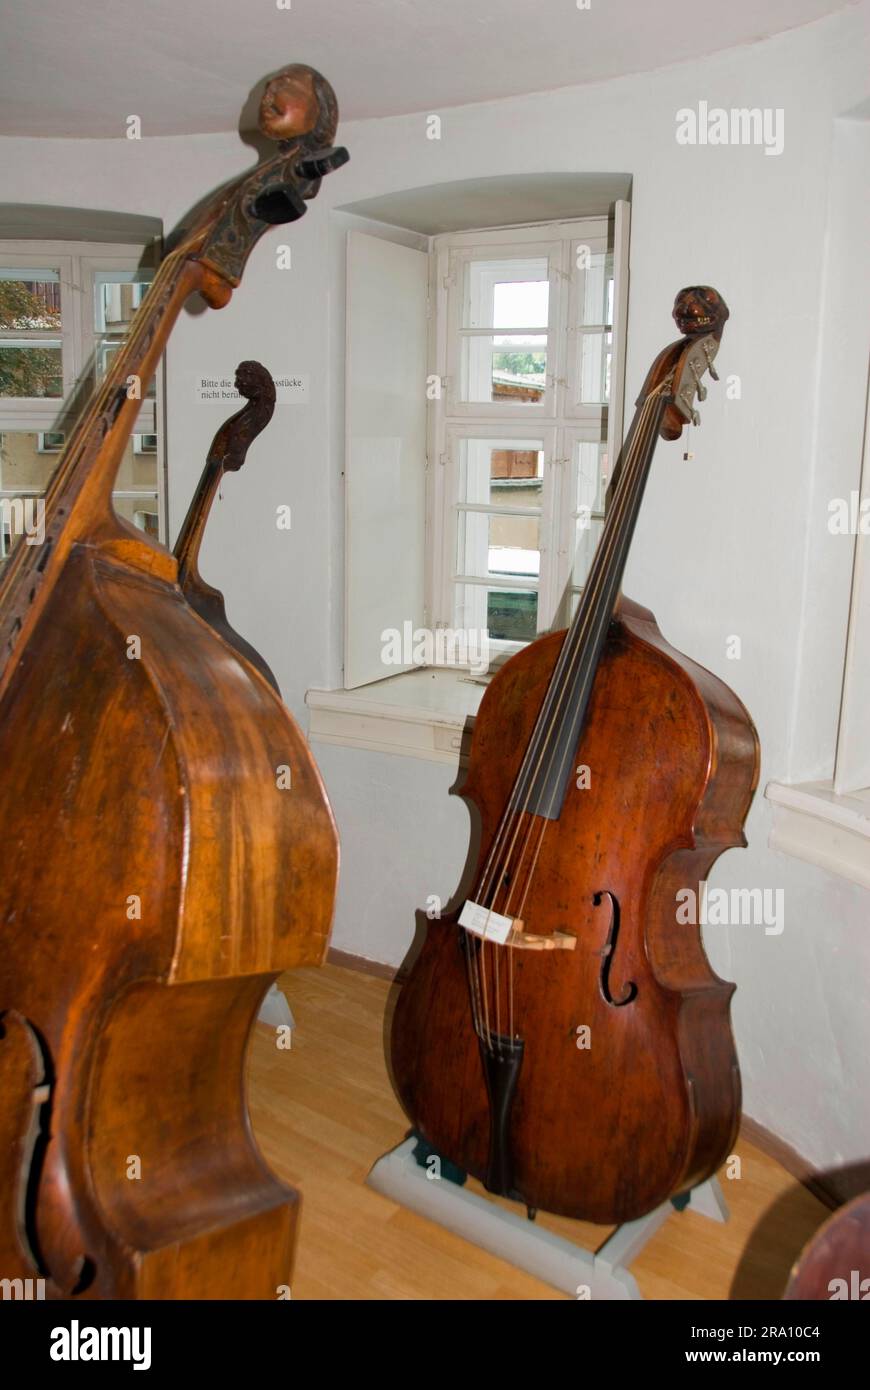 Double bass, musical instrument museum, musical instruments, music, Paulus-Schloessel, late baroque town house, Markneukirchen, Vogtland, Saxony Stock Photo